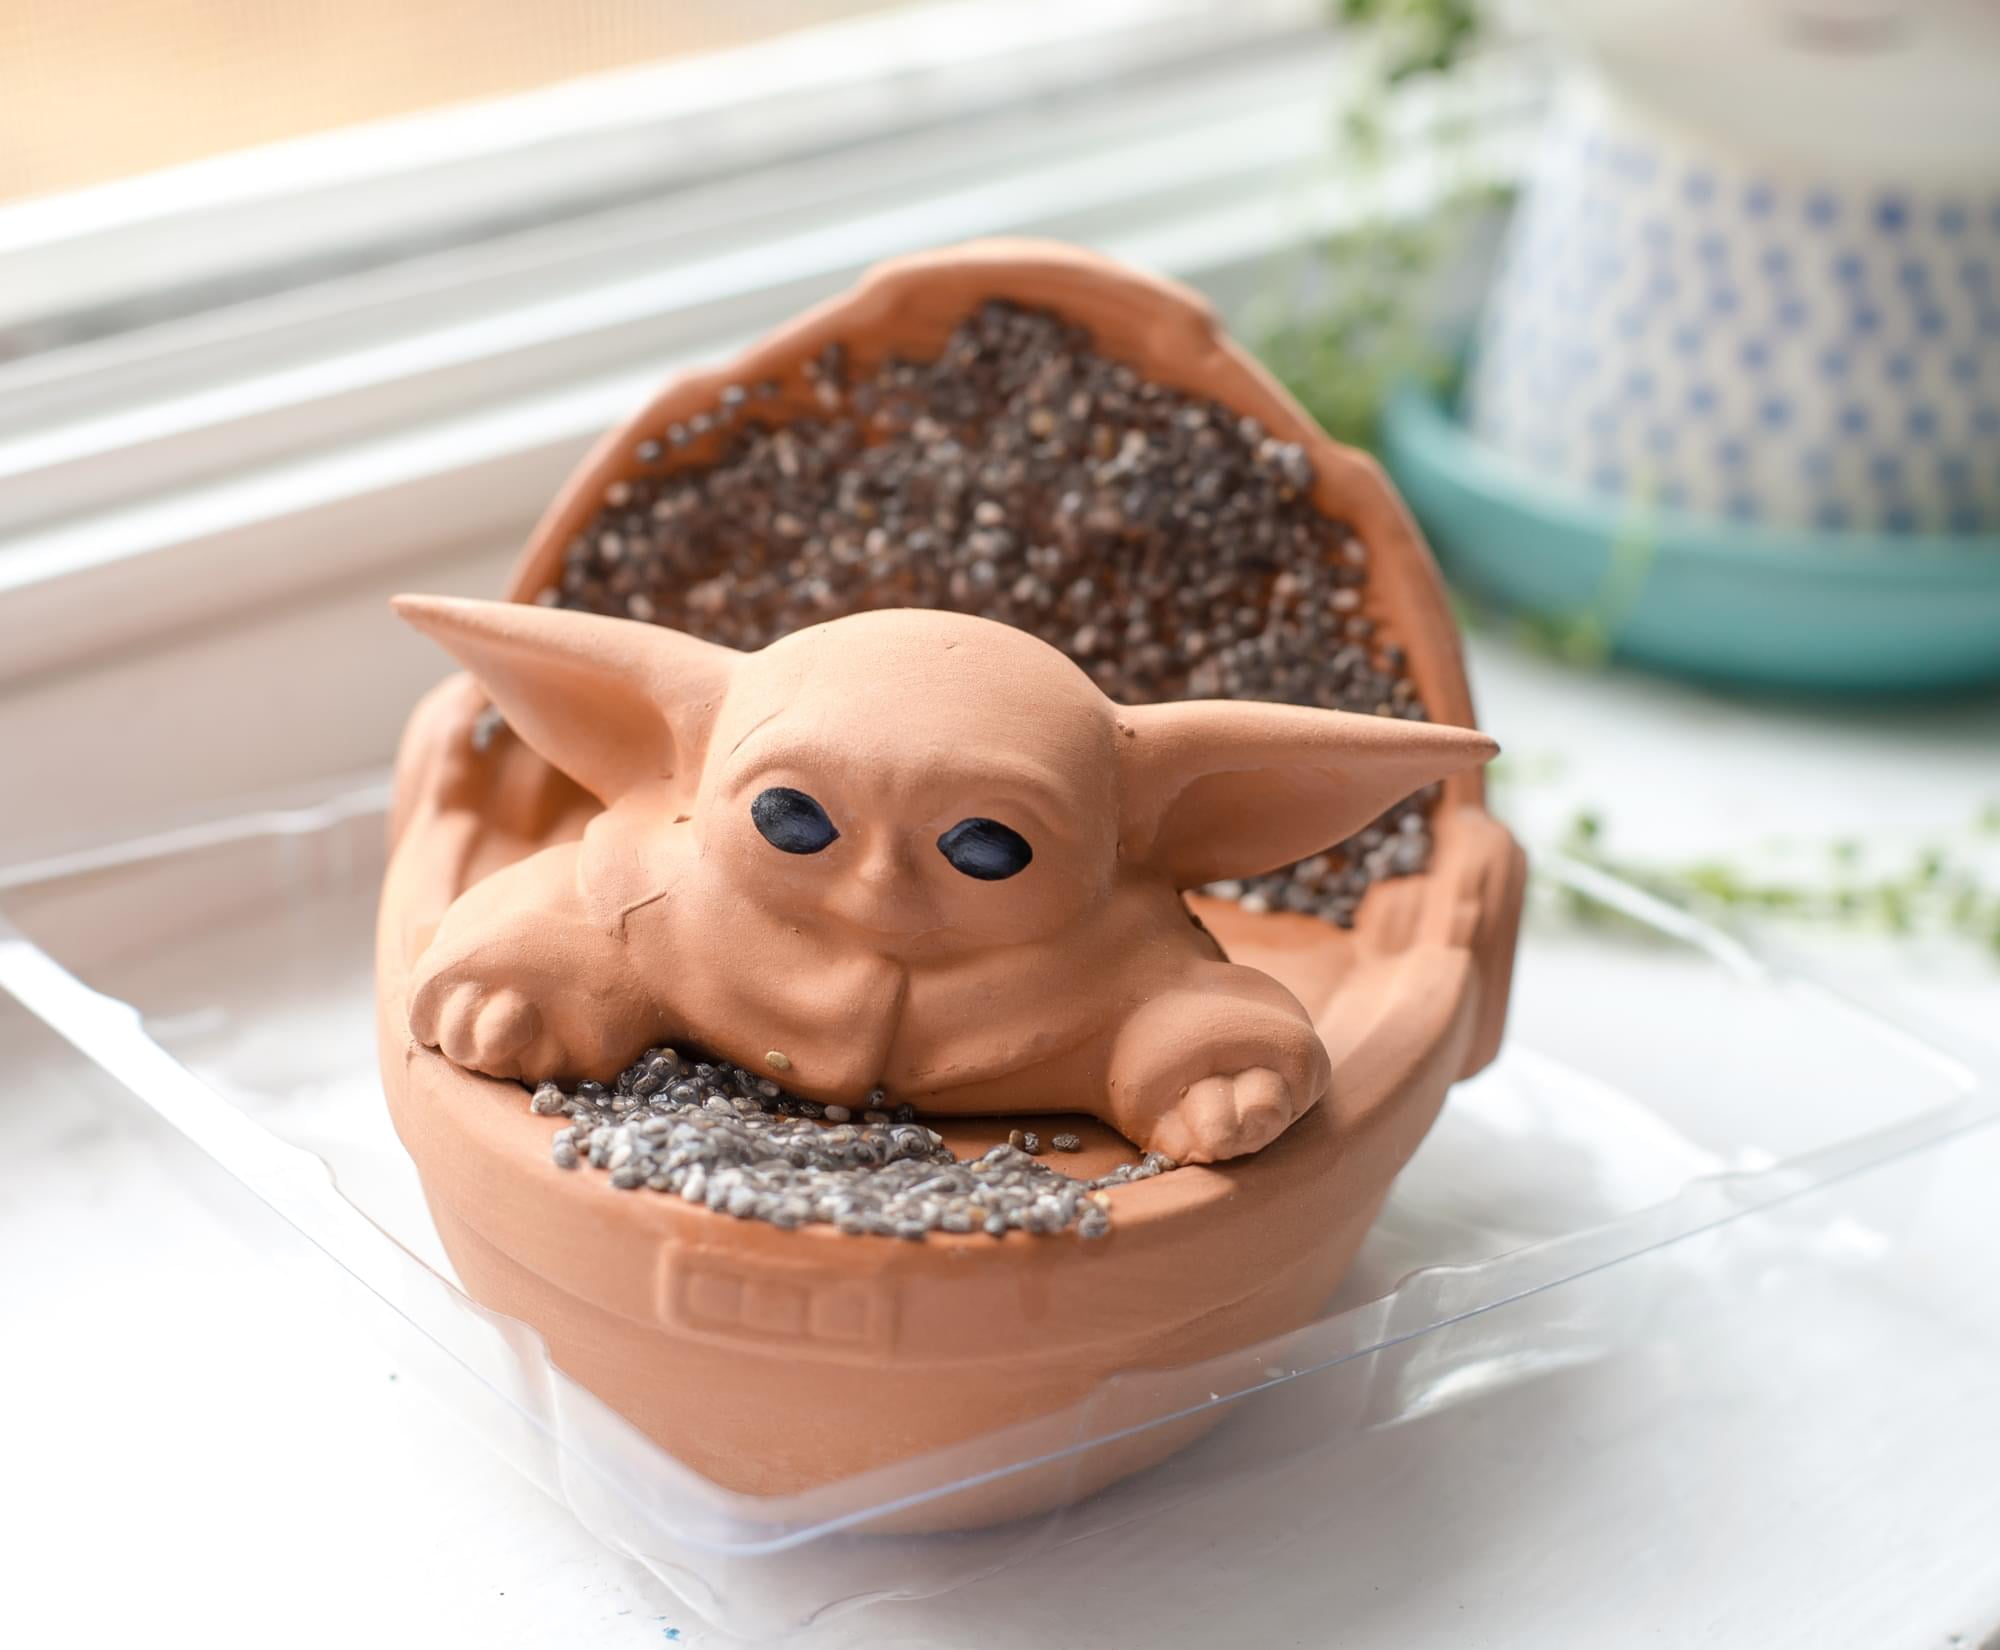 A Chia Pet that'll let you raise your own precious foundling with love and  care — just like Mando with Baby Yoda.